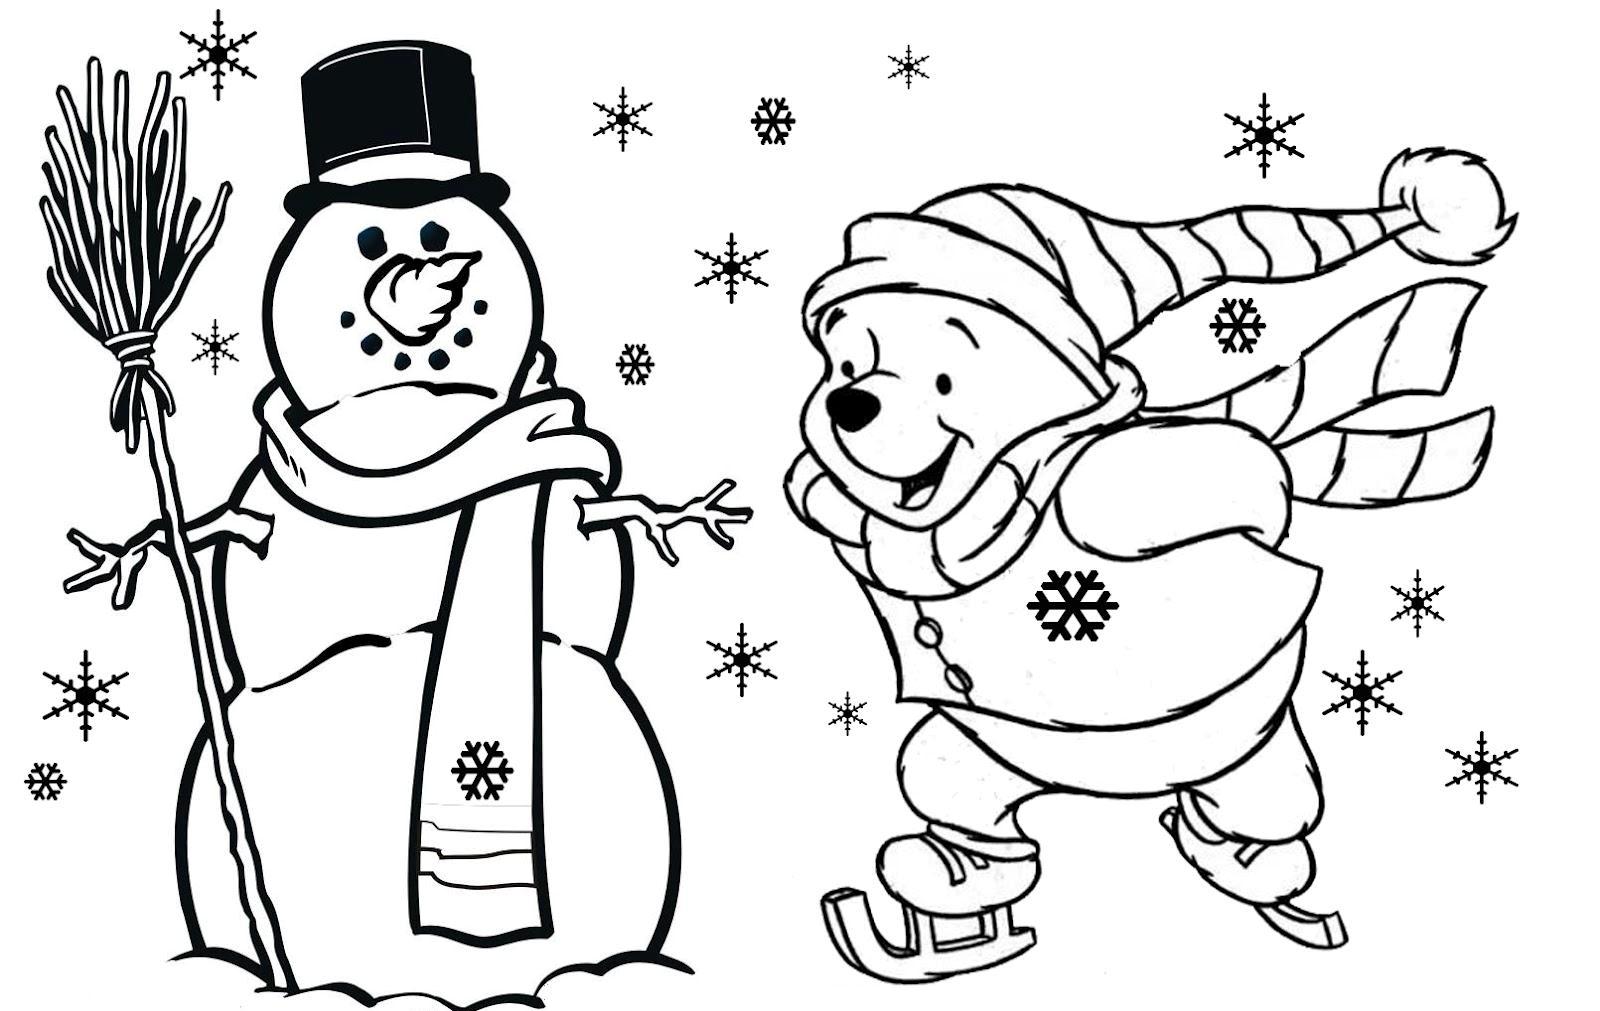 Free Childrens Christmas Coloring Pages at GetDrawings.com | Free for